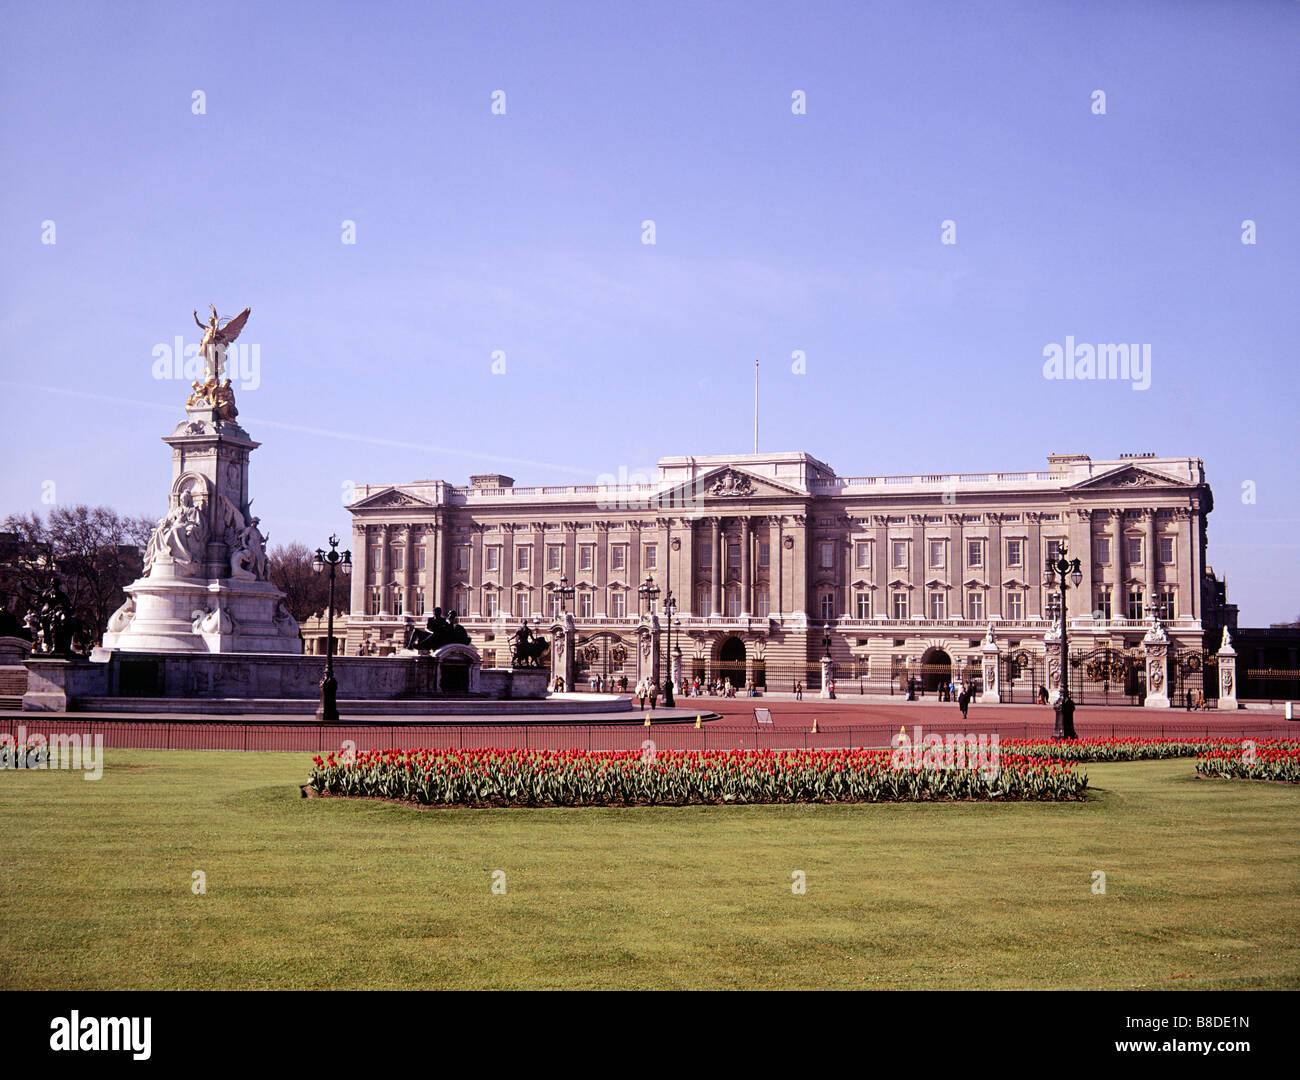 London Buckingham Palace and the Queen Victoria Memorial in early springtime. Stock Photo